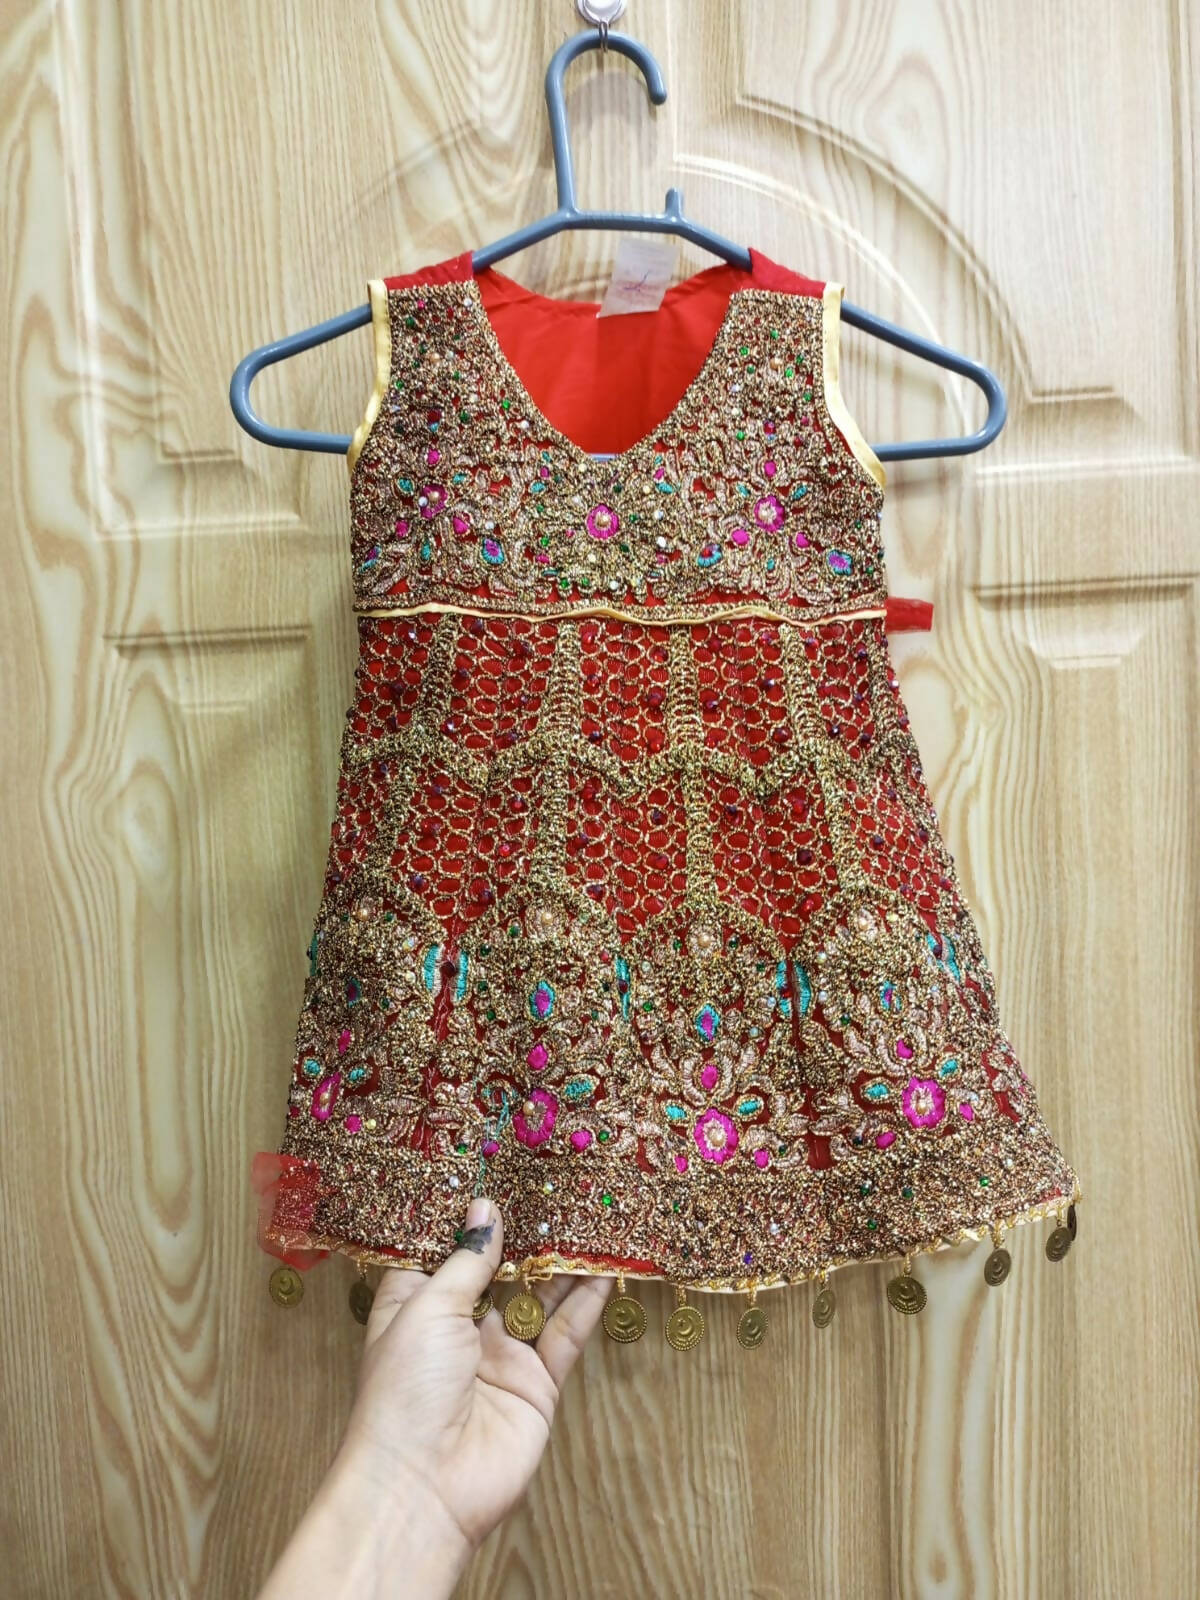 Red Fancy Girls Frok | Girls Skirts & Dresses | Size: 2 to 3 years Girls | Preloved